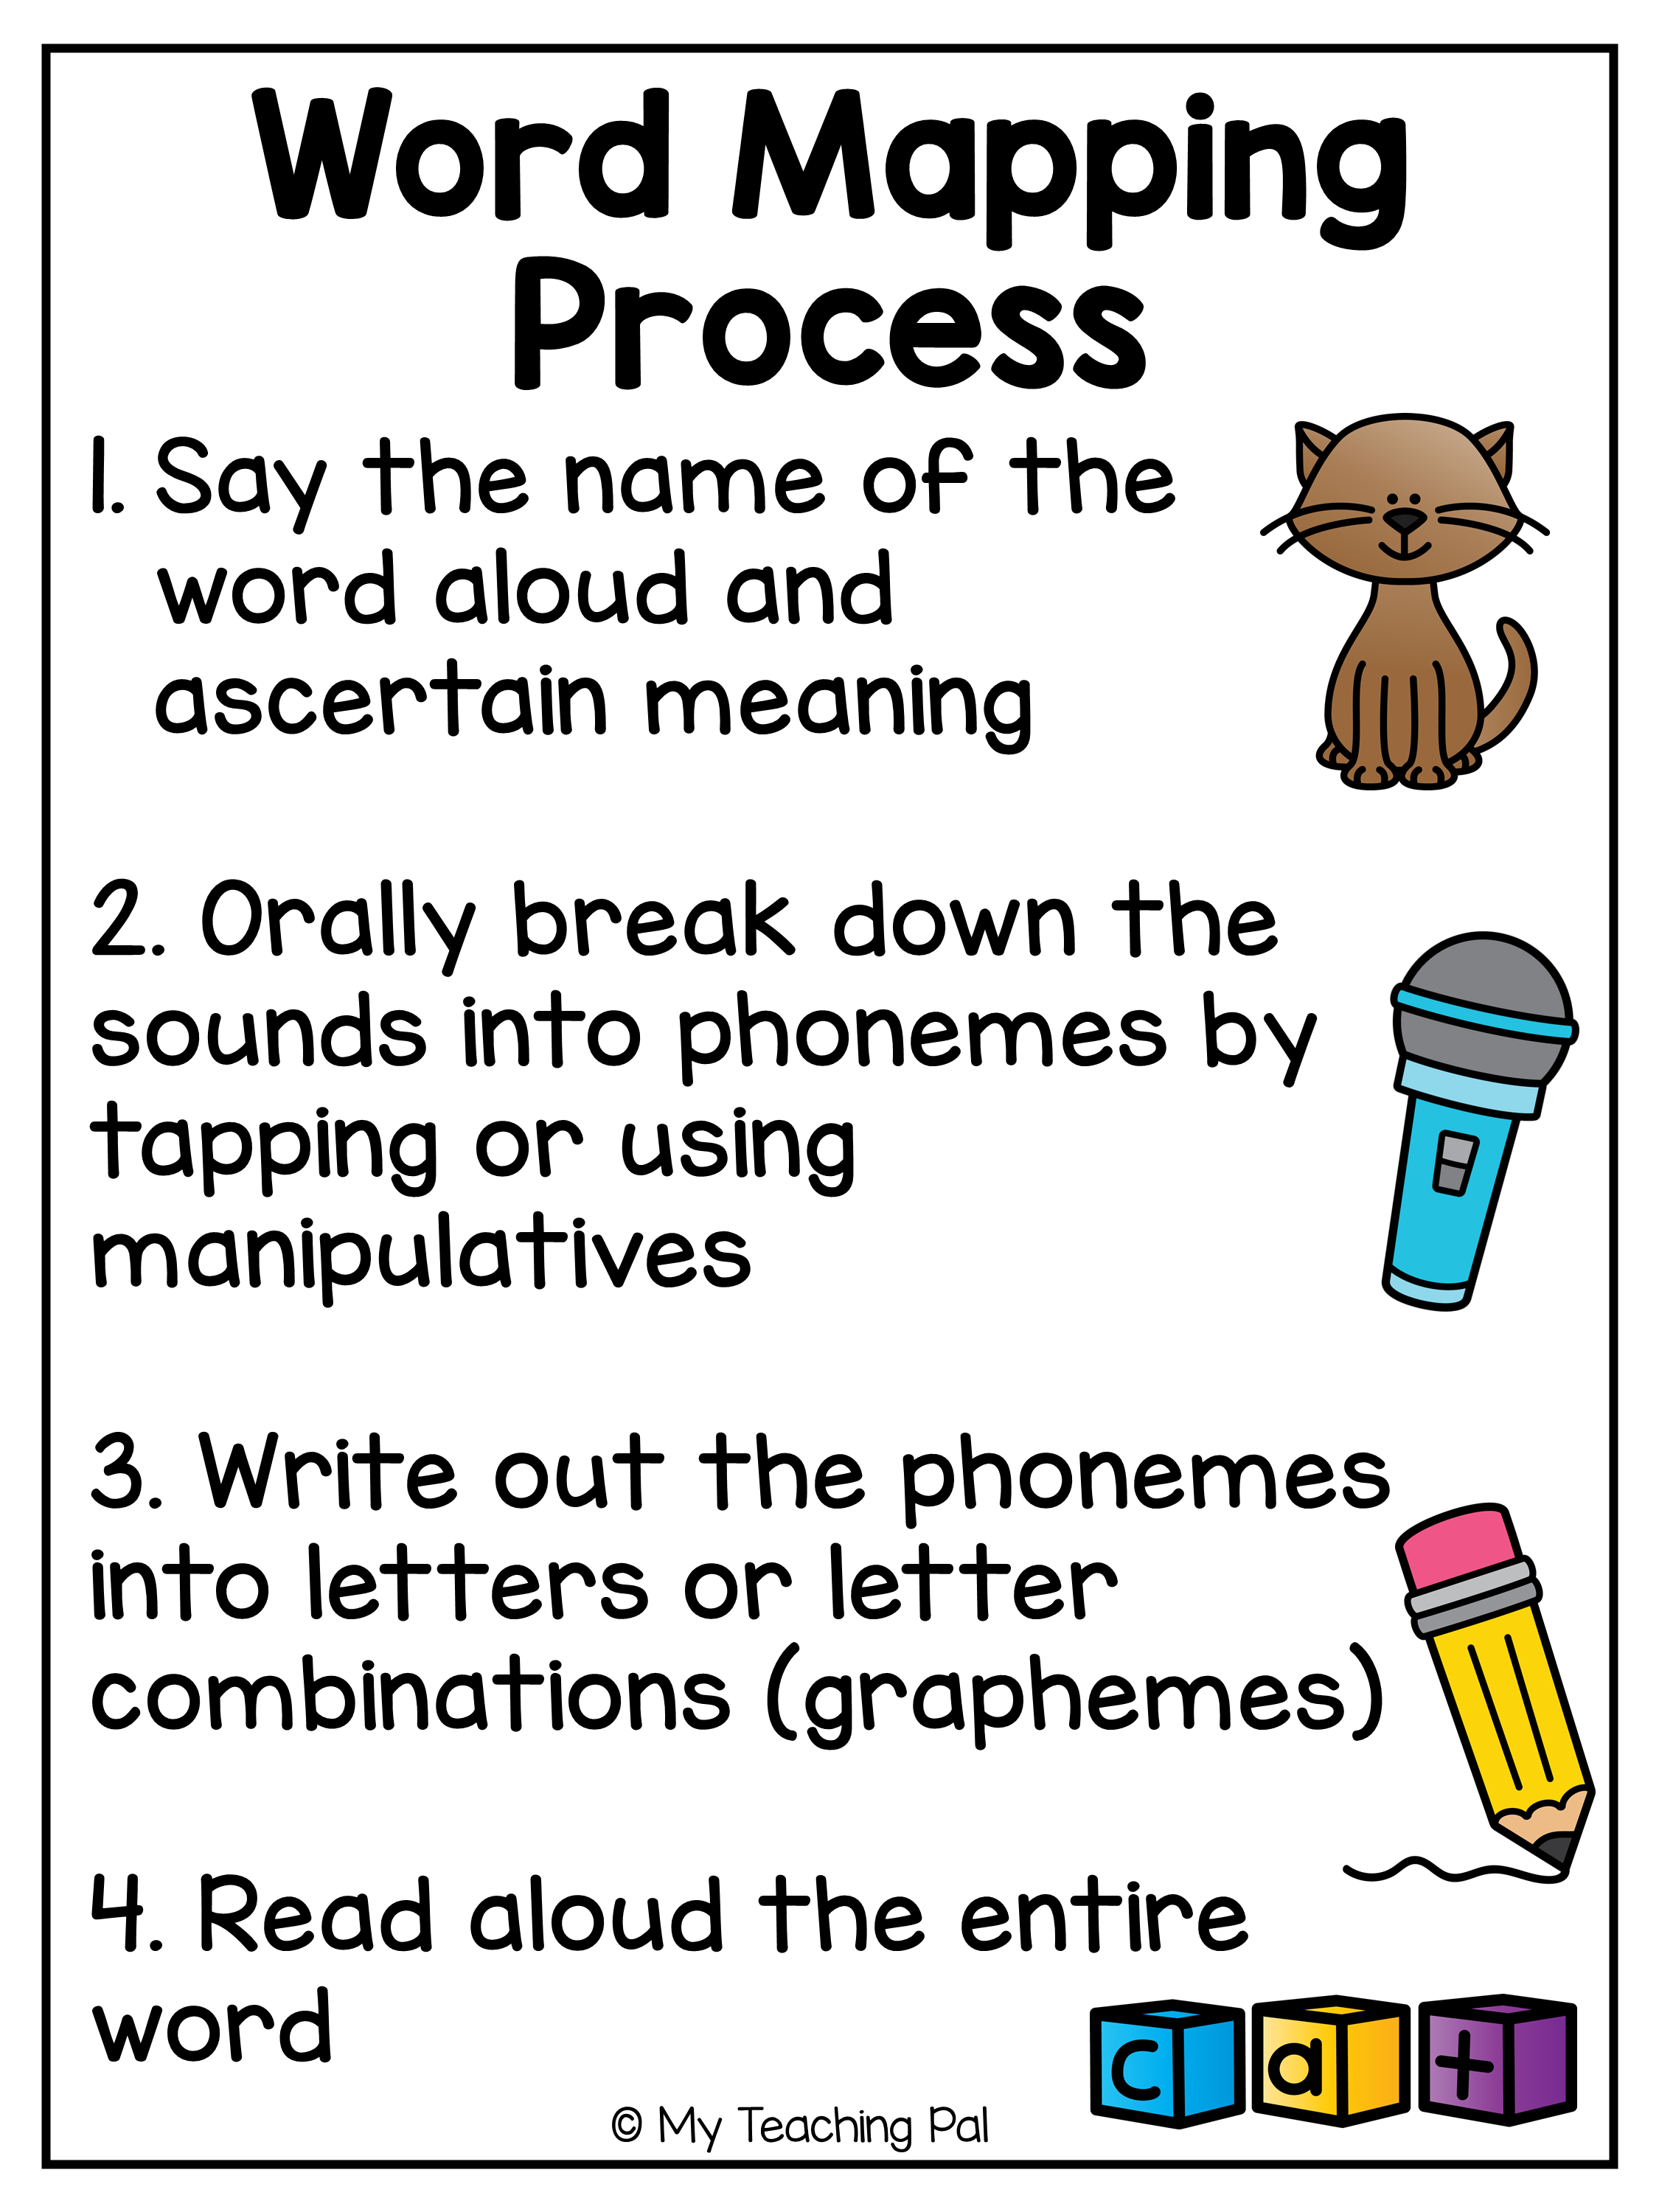 The word mapping process